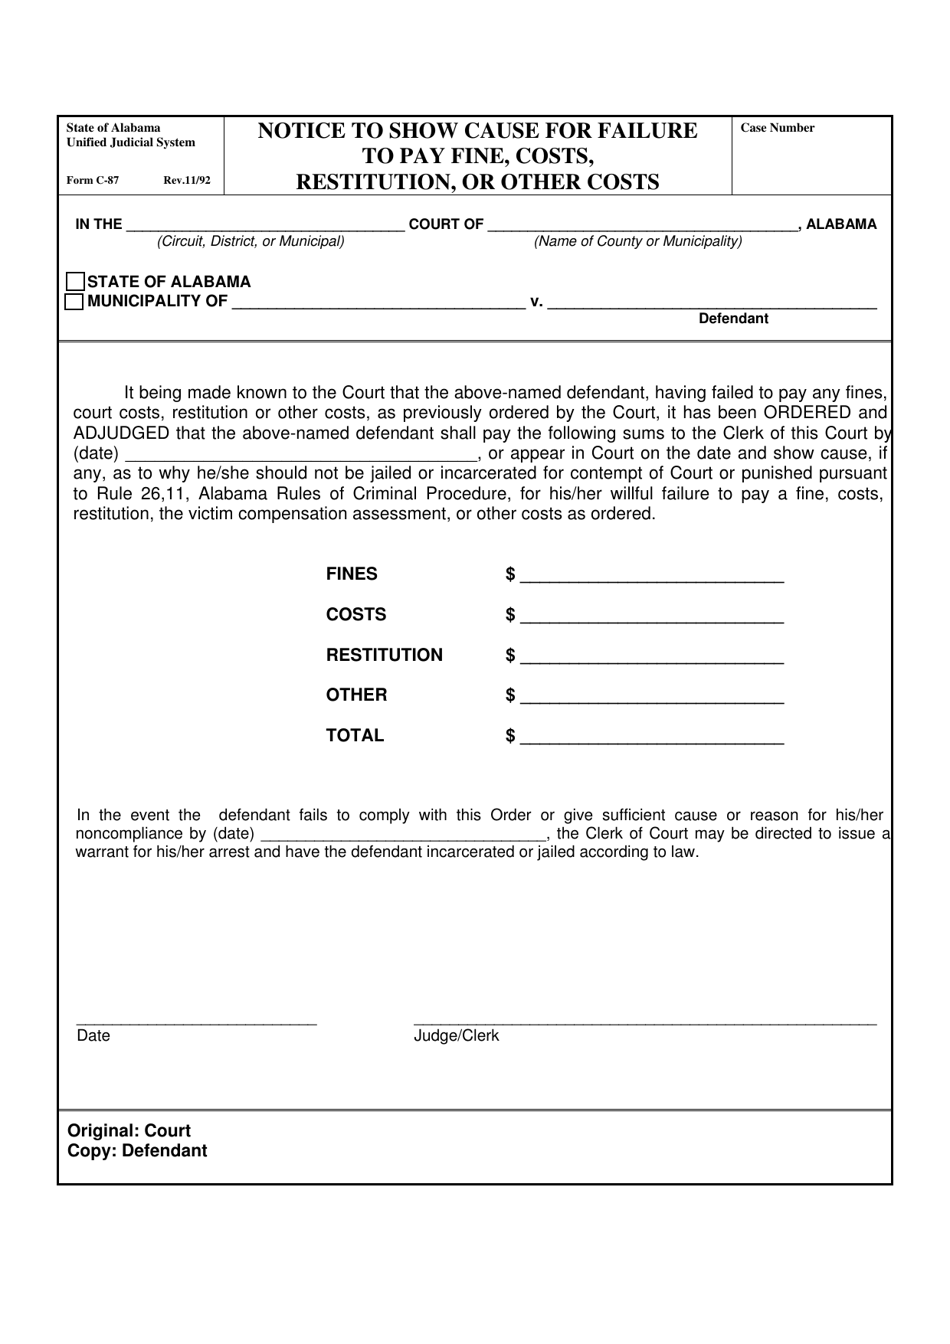 Form C-87 Notice to Show Cause for Failure to Pay Fine, Costs, Restitution, or Other Costs - Alabama, Page 1